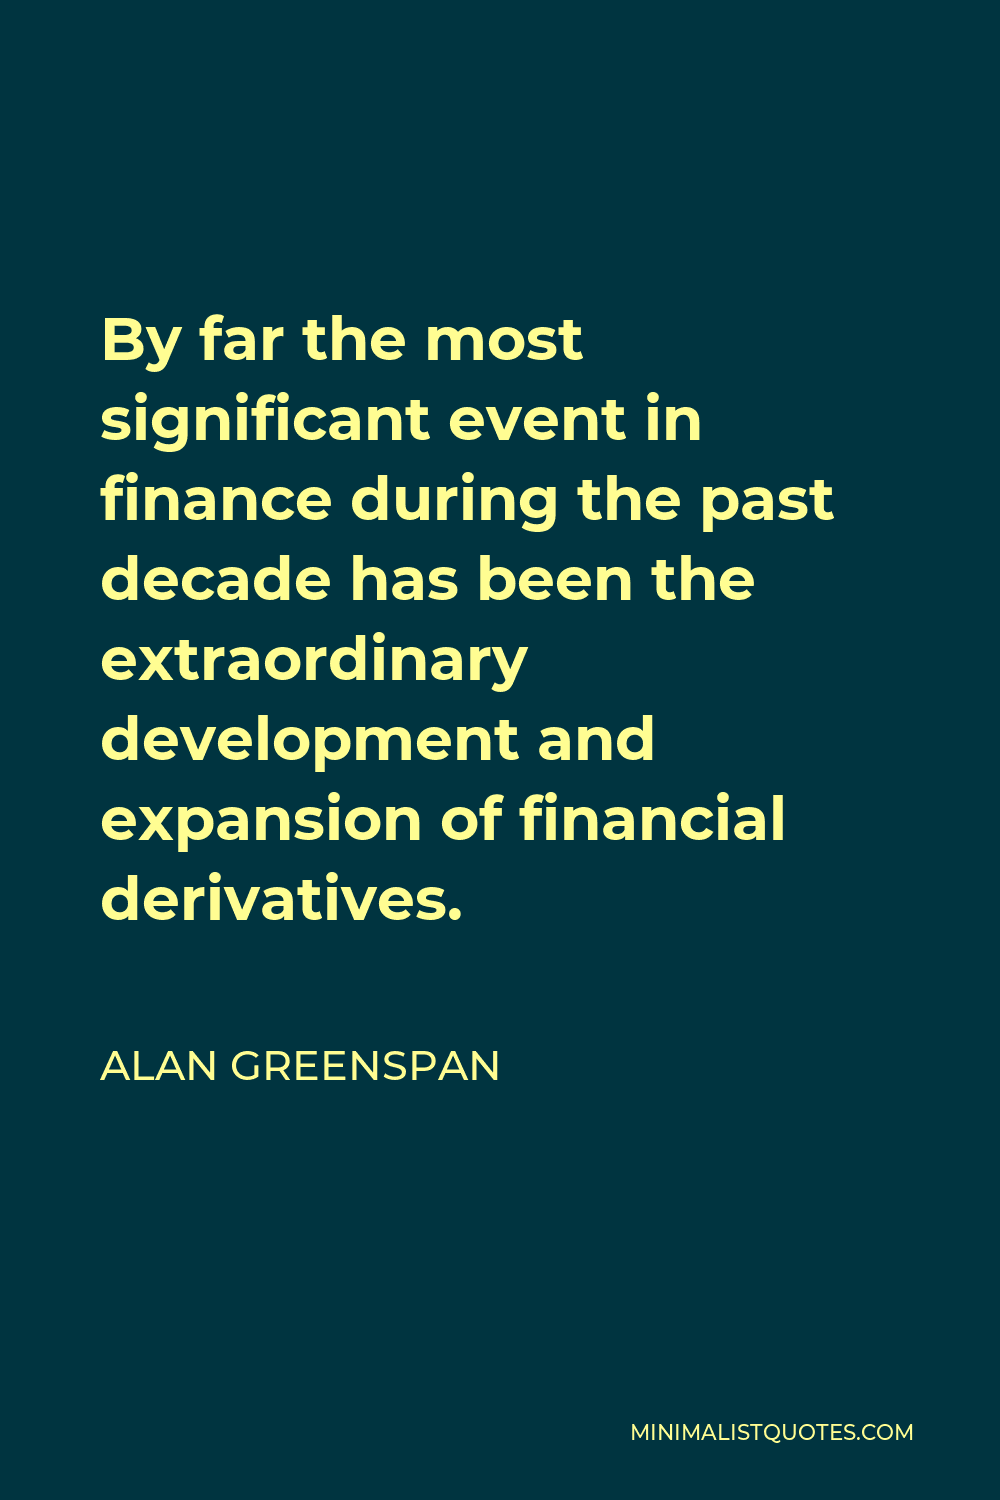 Alan Greenspan Quote - By far the most significant event in finance during the past decade has been the extraordinary development and expansion of financial derivatives.